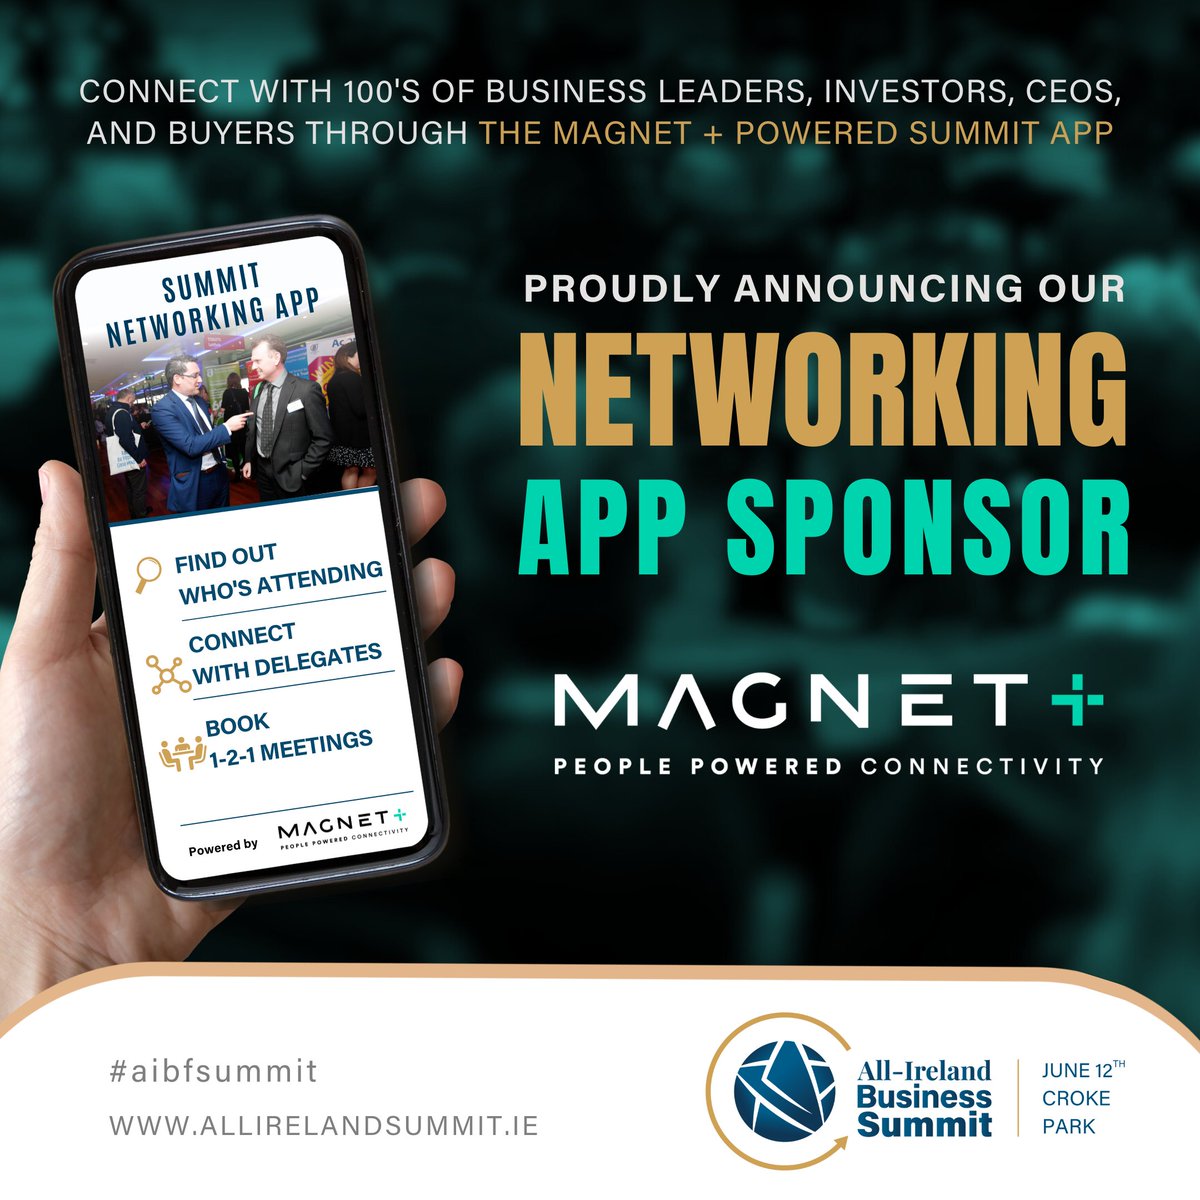 📱 Magnet +, Ireland's largest connectivity network, are sponsor of our networking app for the All-Ireland Business Summit at Croke Park on June 12th! The Brella App, allows attendees to connect before, during, & after the event. Book Now: allirelandsummit.com/tickets/ #AIBFSummit